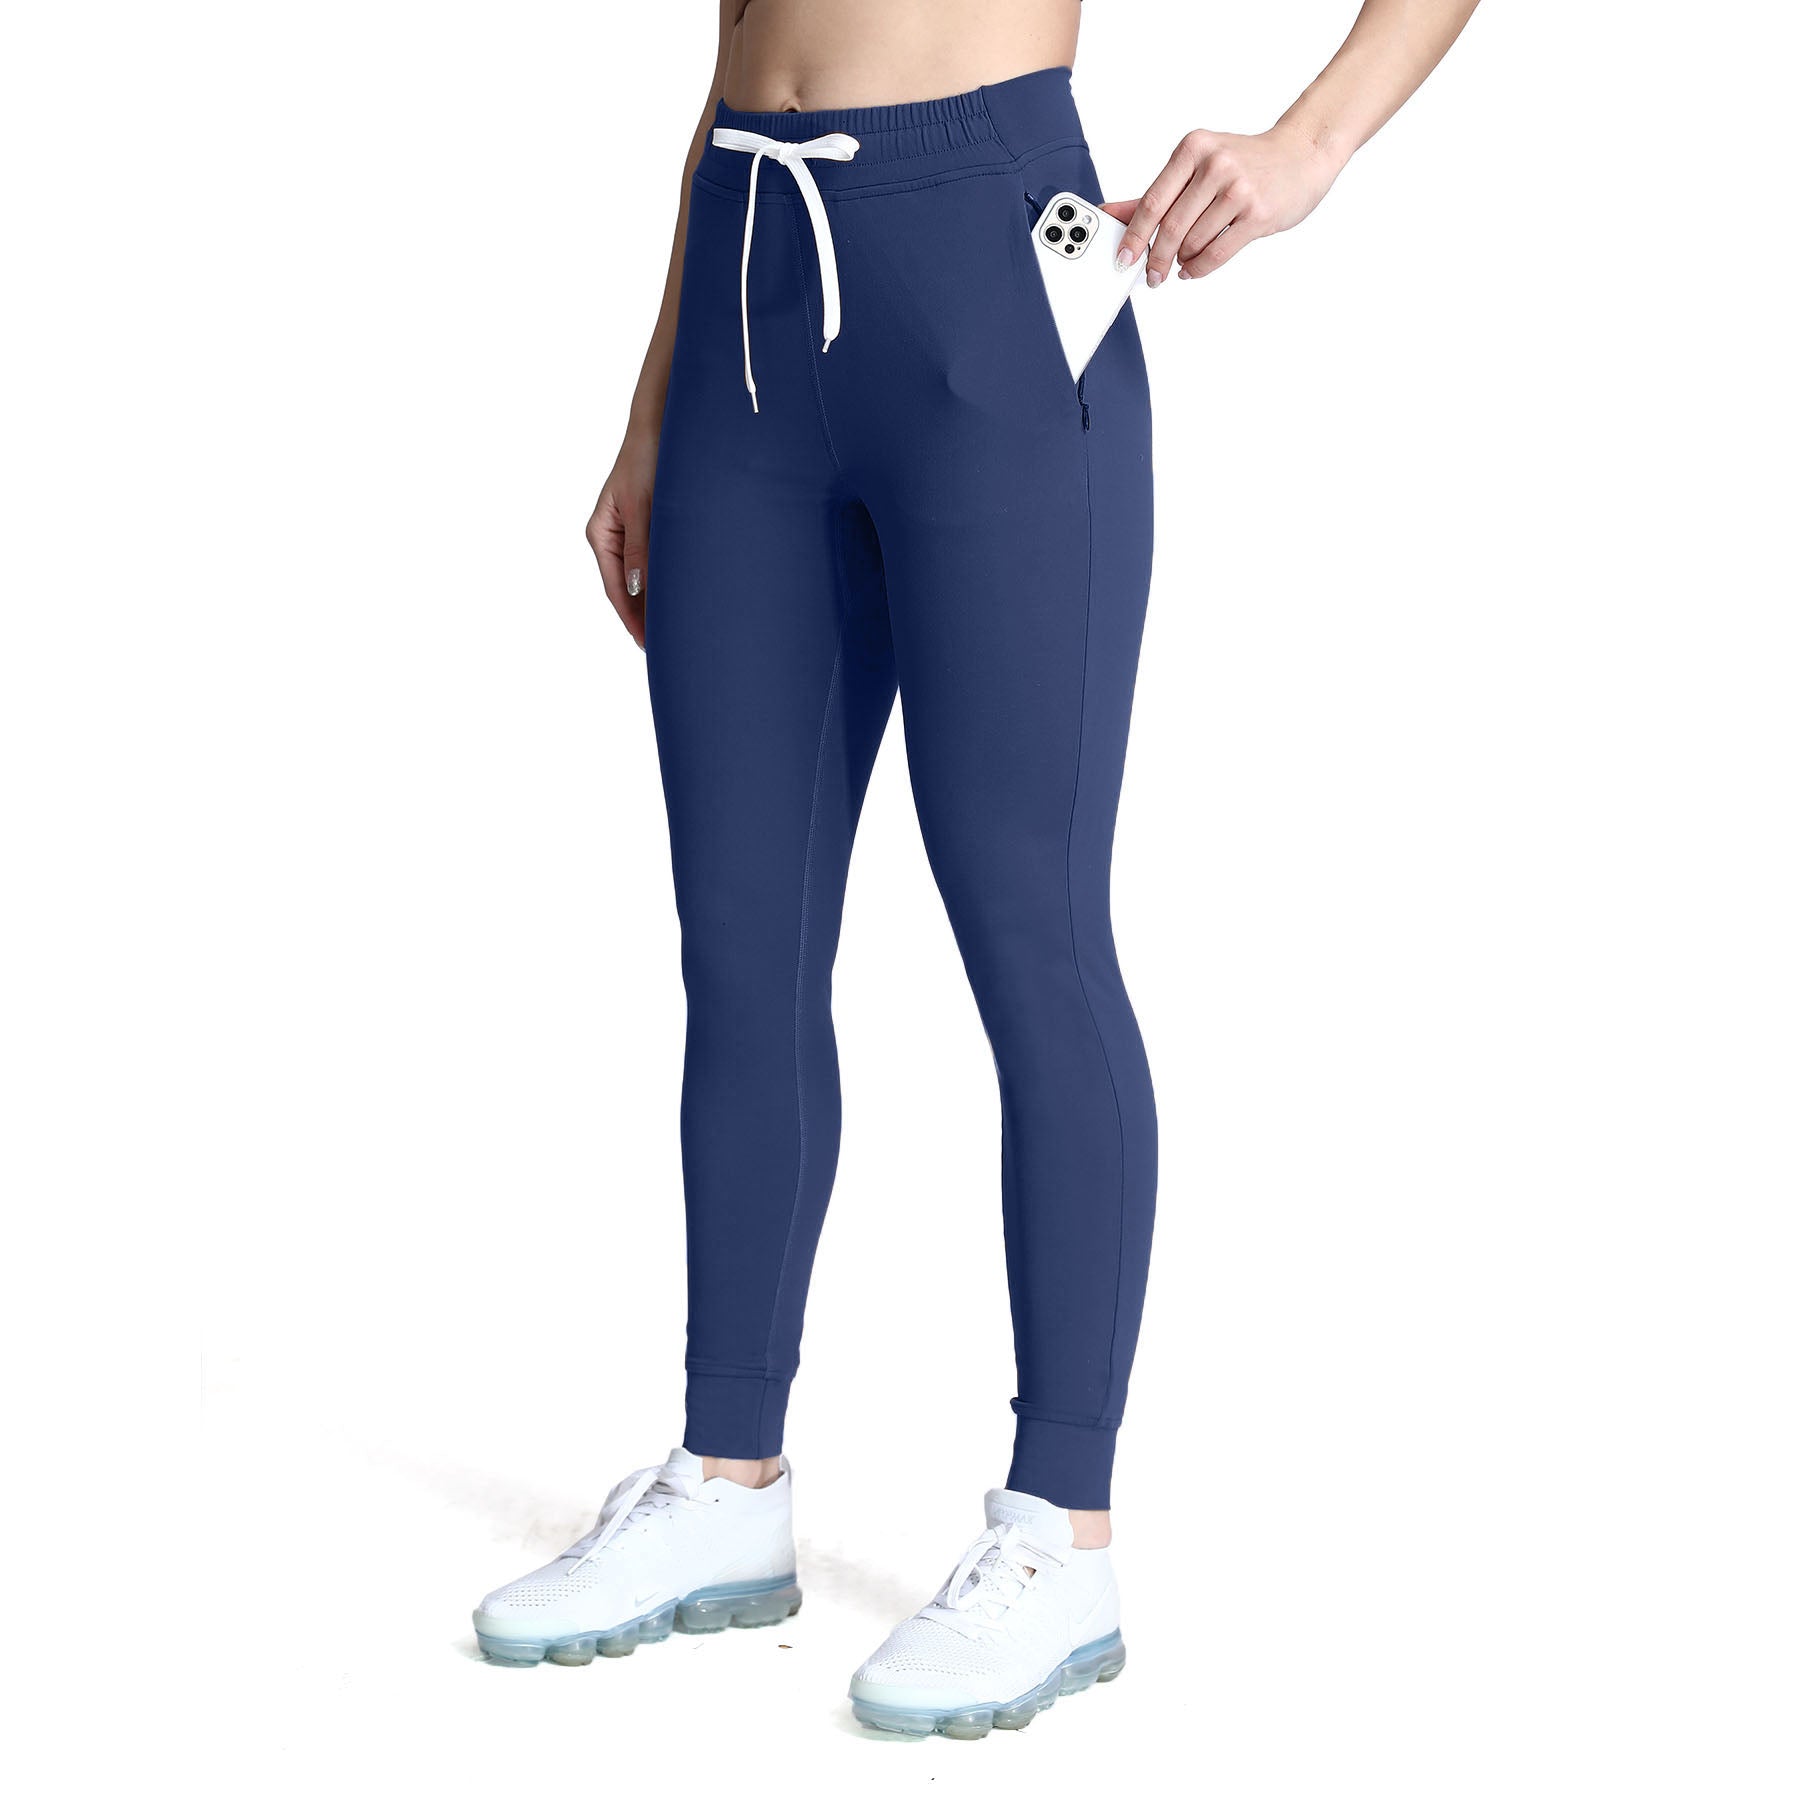  Aoxjox Contour Joggers for Women with Pockets Leggings